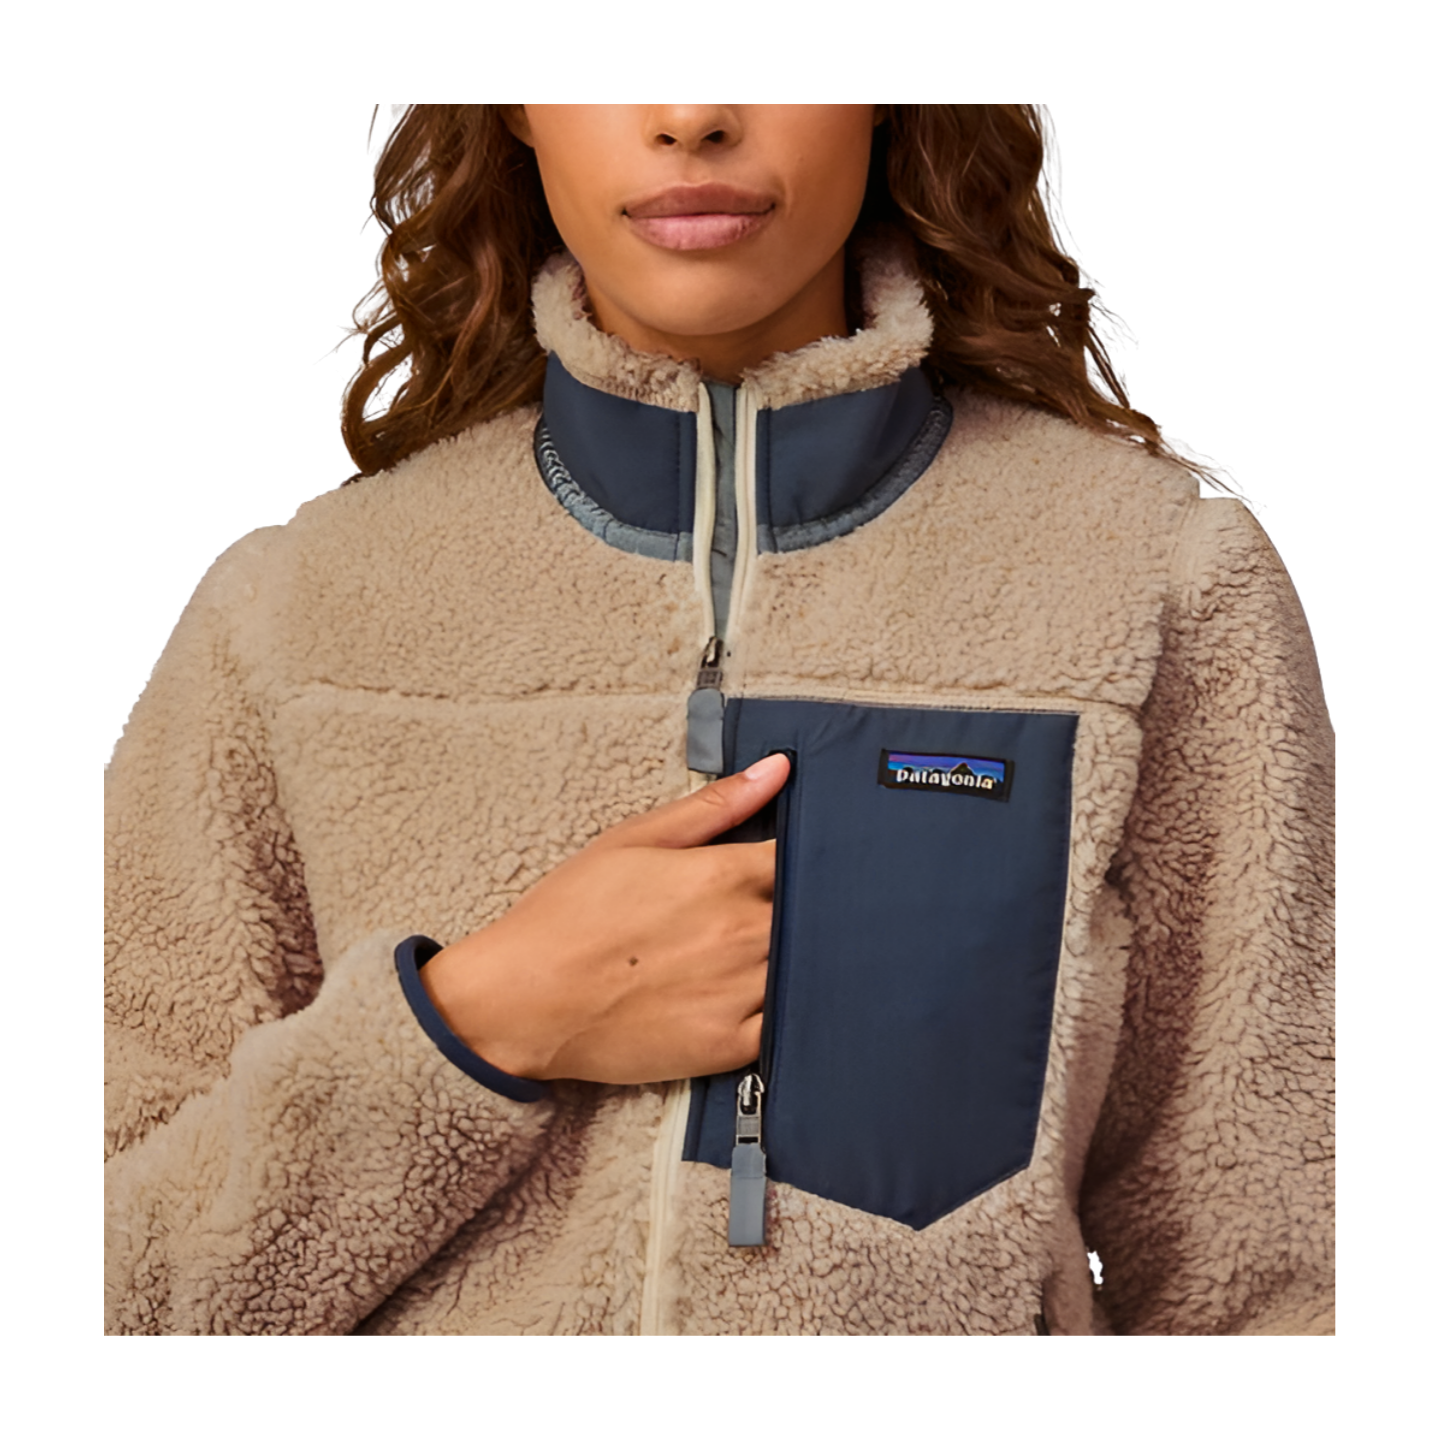 Custom Patagonia Apparel is a Sustainable and Authentic Corporate Gift